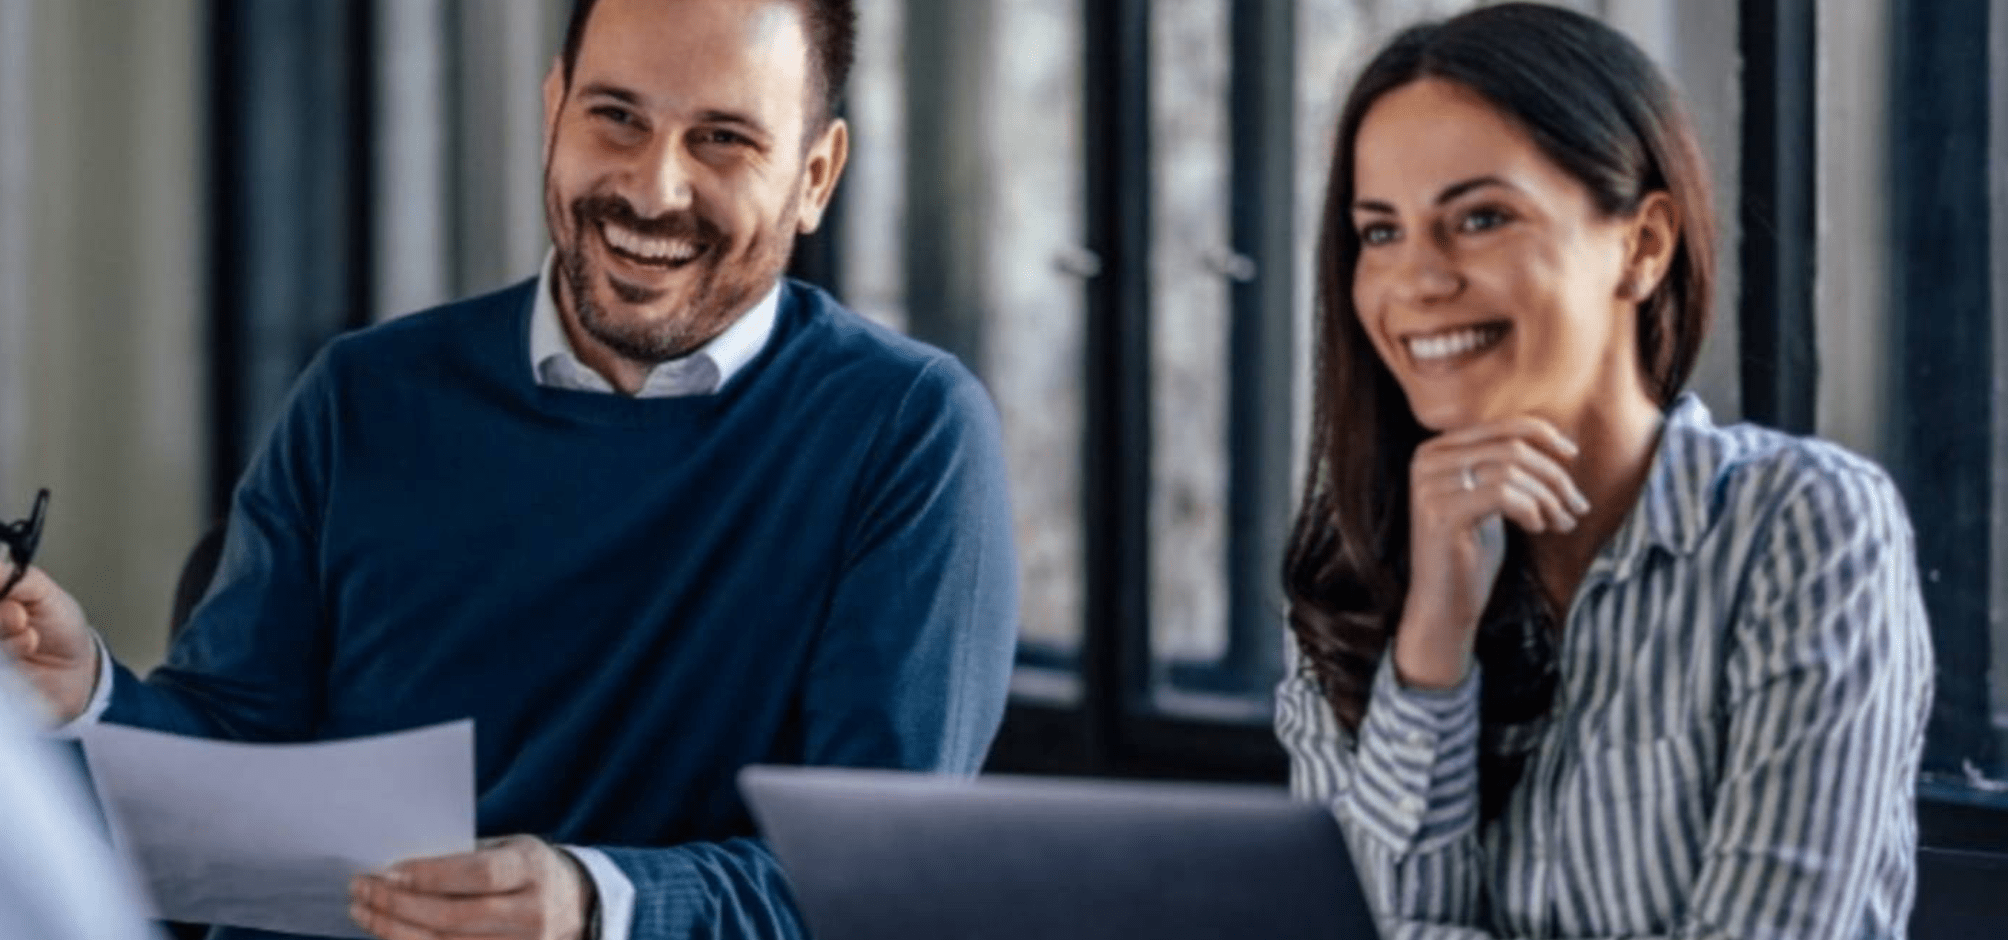 Man and woman smiling with laptop